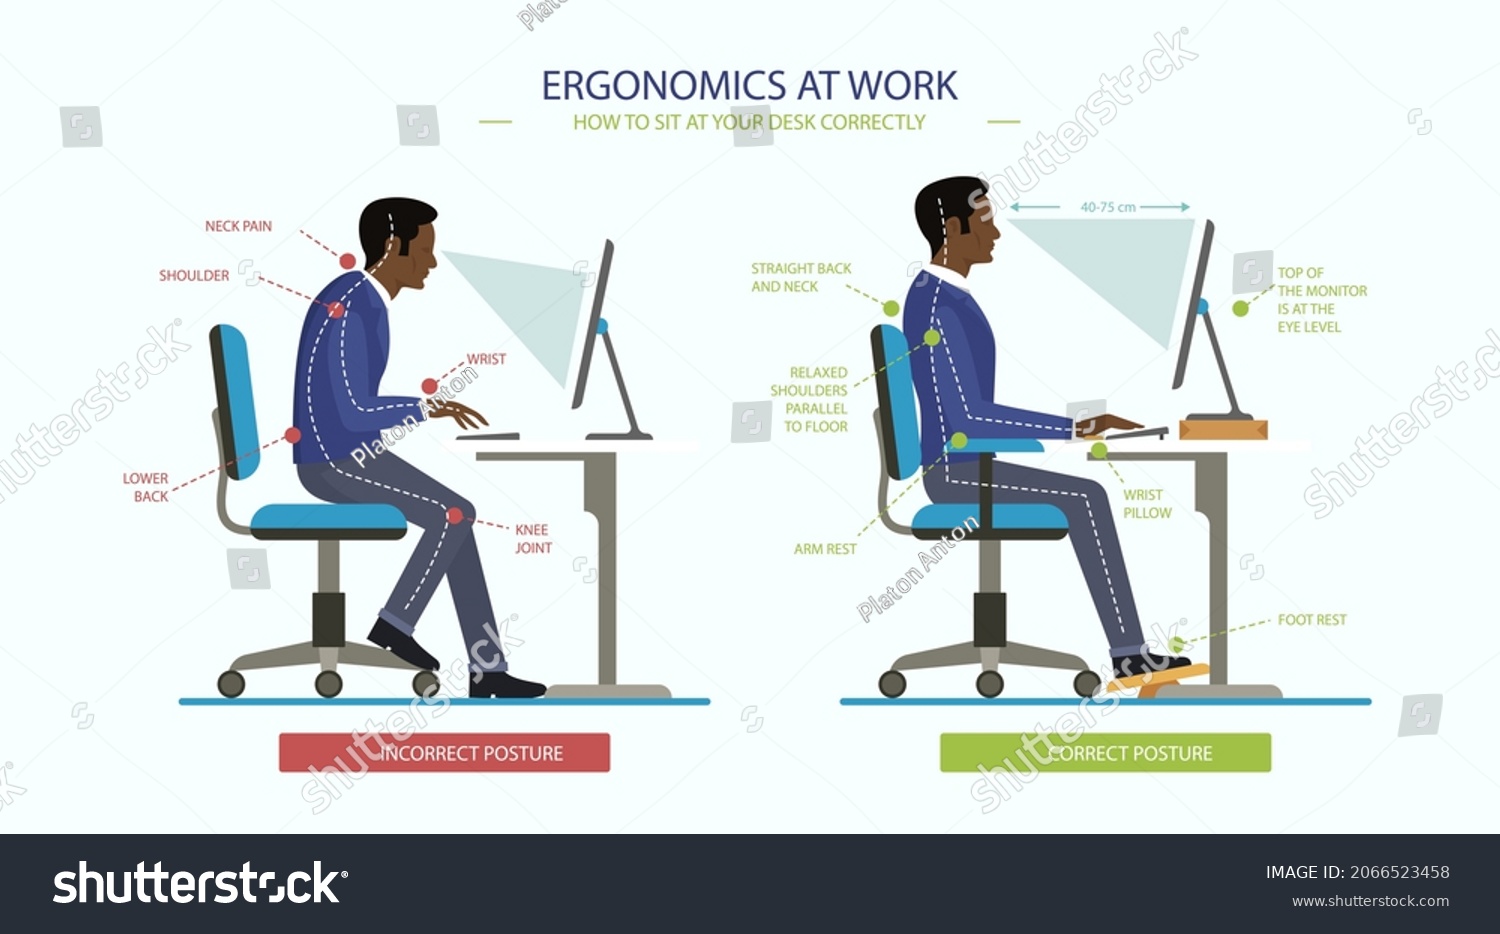 Posture Correction Good Right Bad Wrong Stock Vector Royalty Free 2066523458 Shutterstock